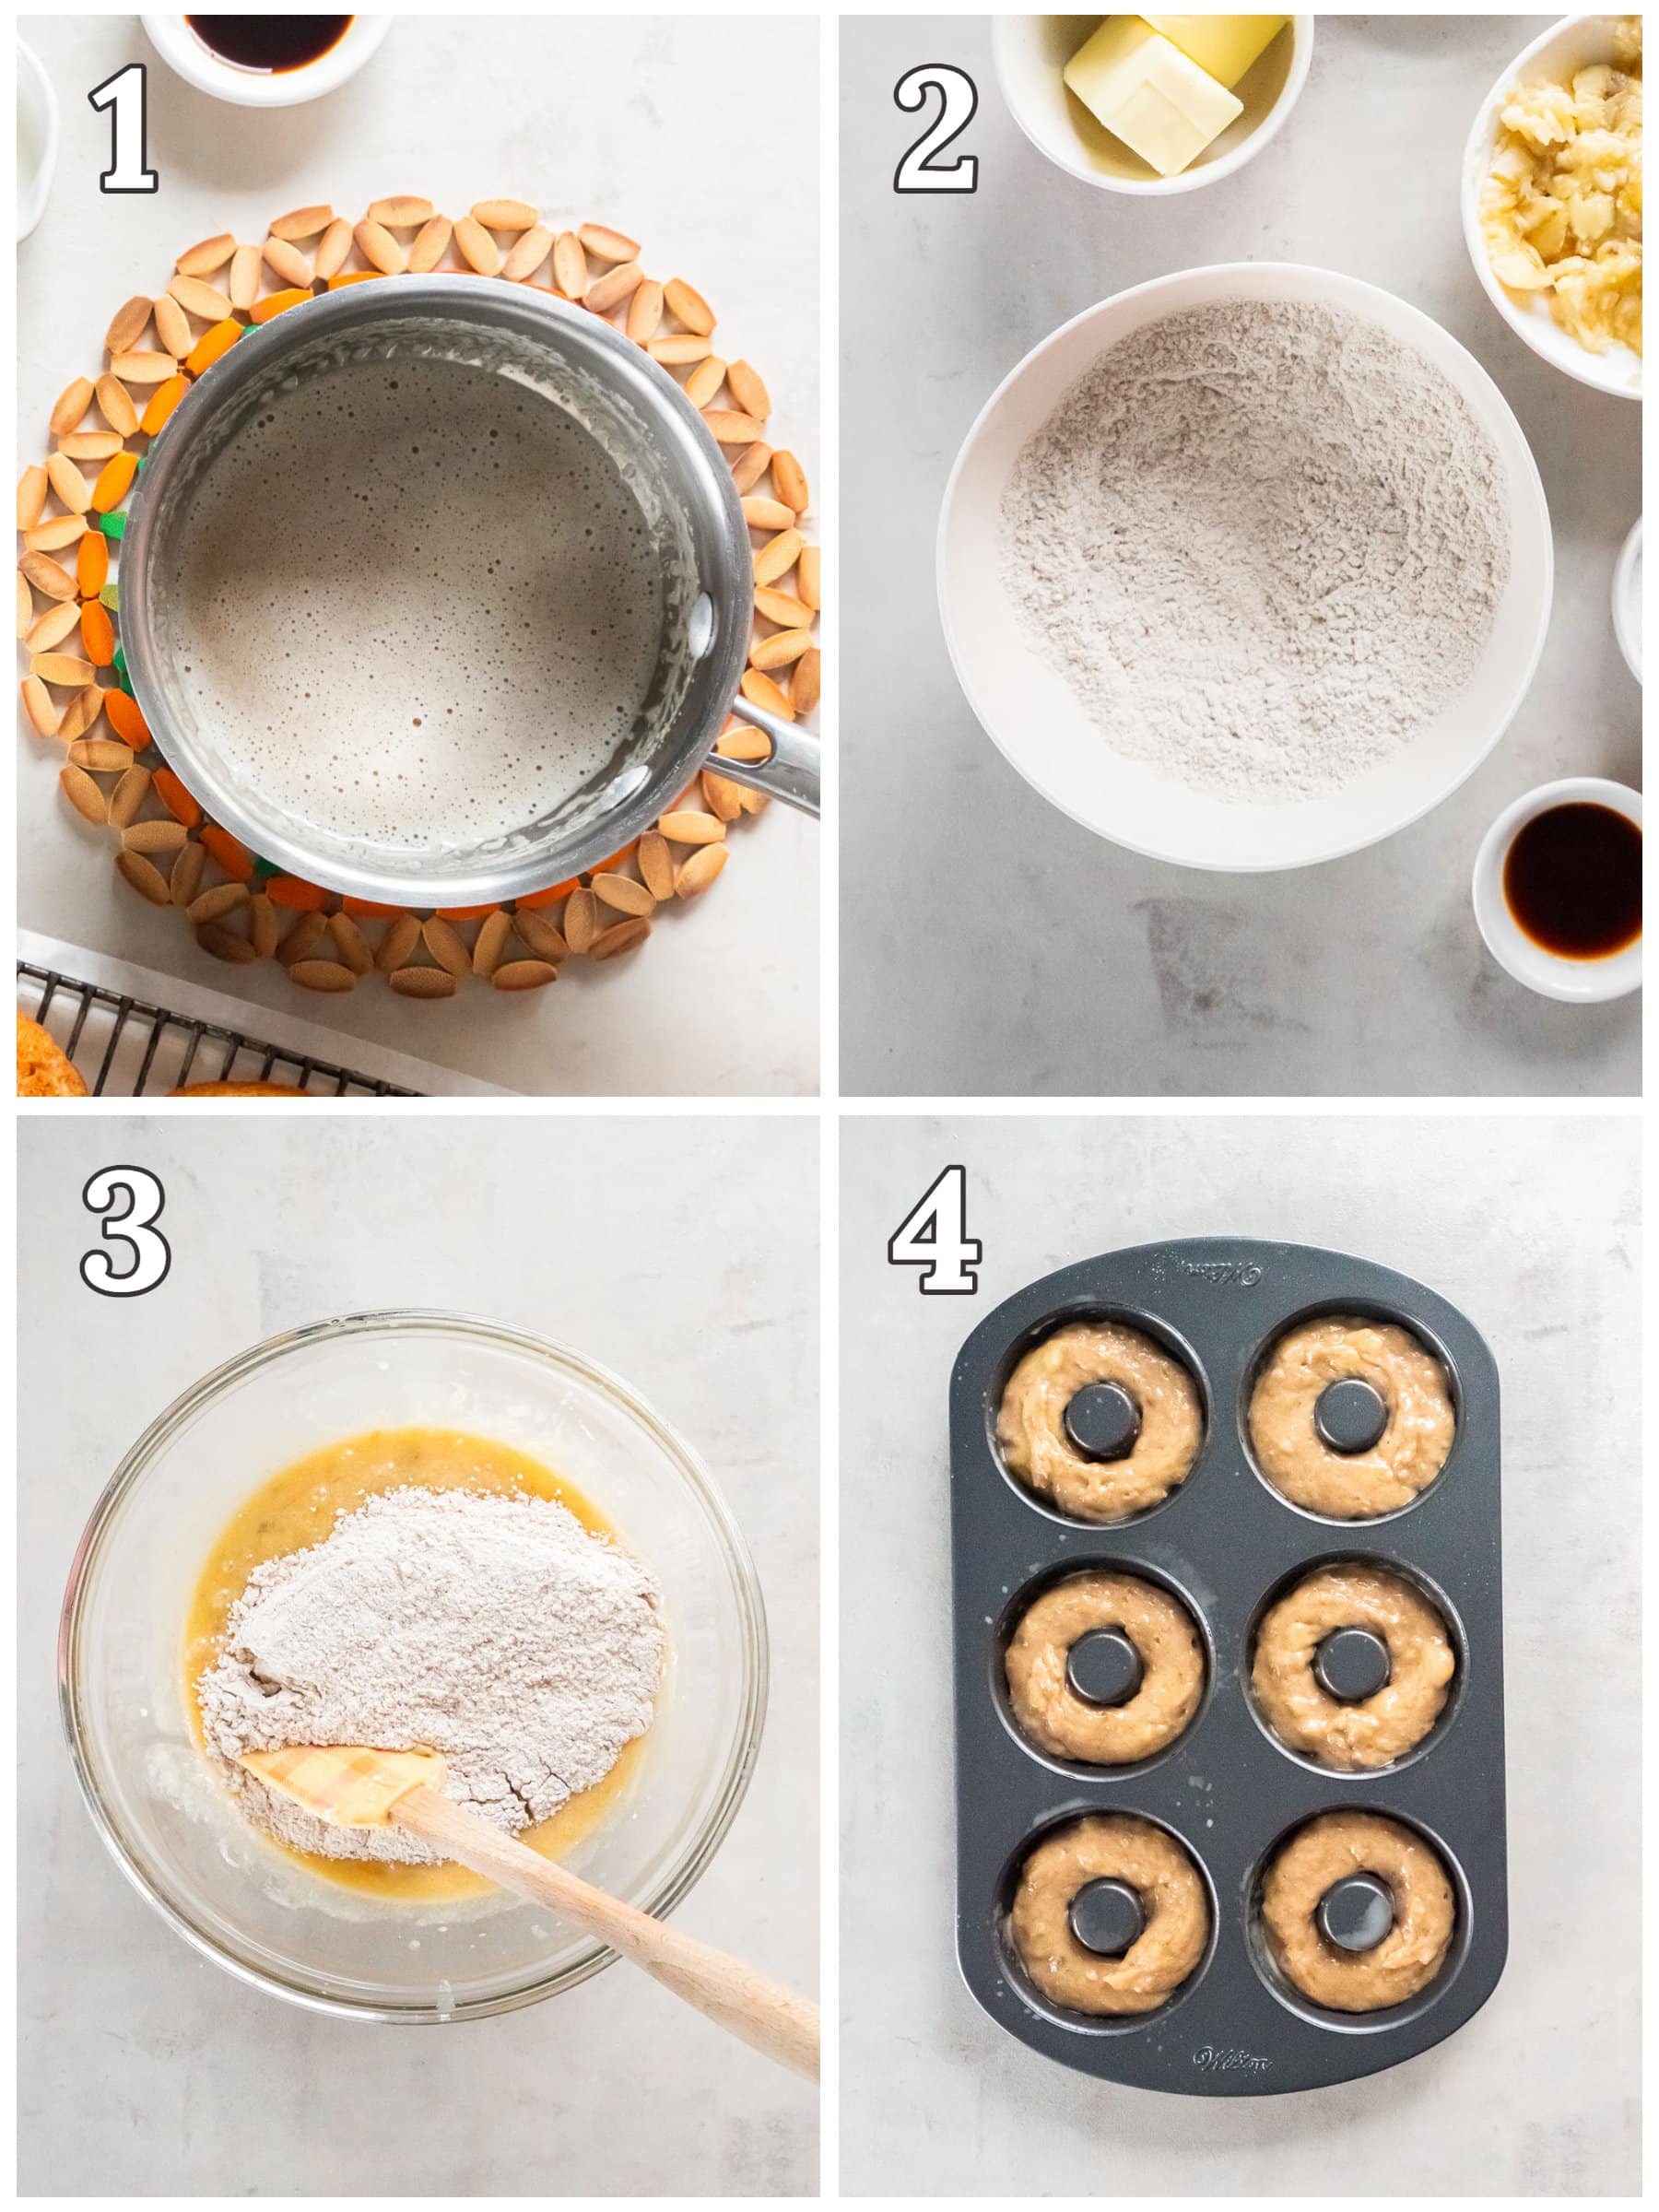 photo collage demonstrating how to make banana donuts in a mixing bowl and donut tin.